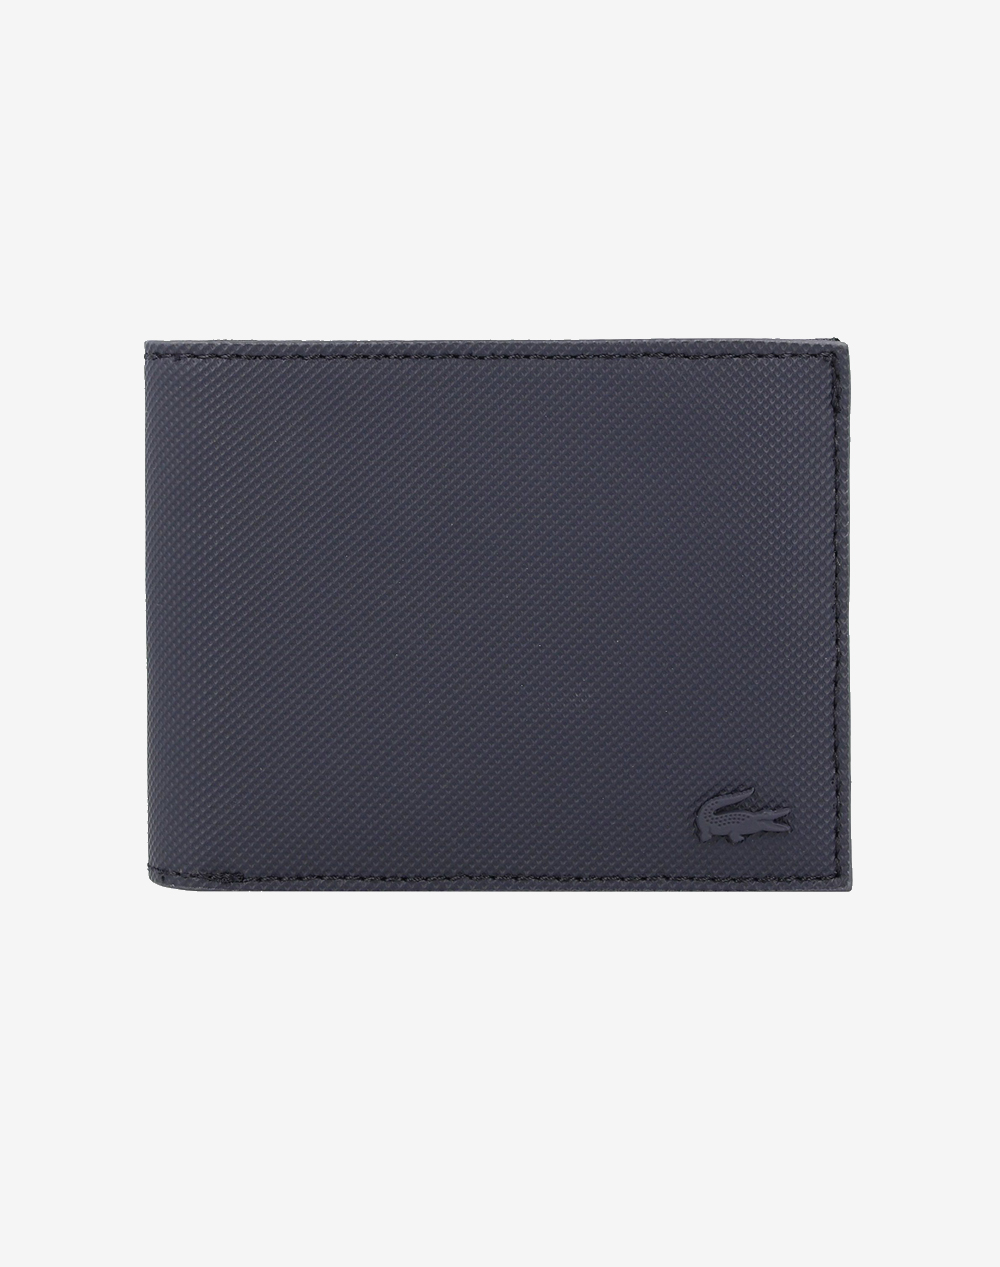 LACOSTE M BILLFOLD COIN WALLET (Dimensions: 11.5 x 9.5 x 2.5 cm)